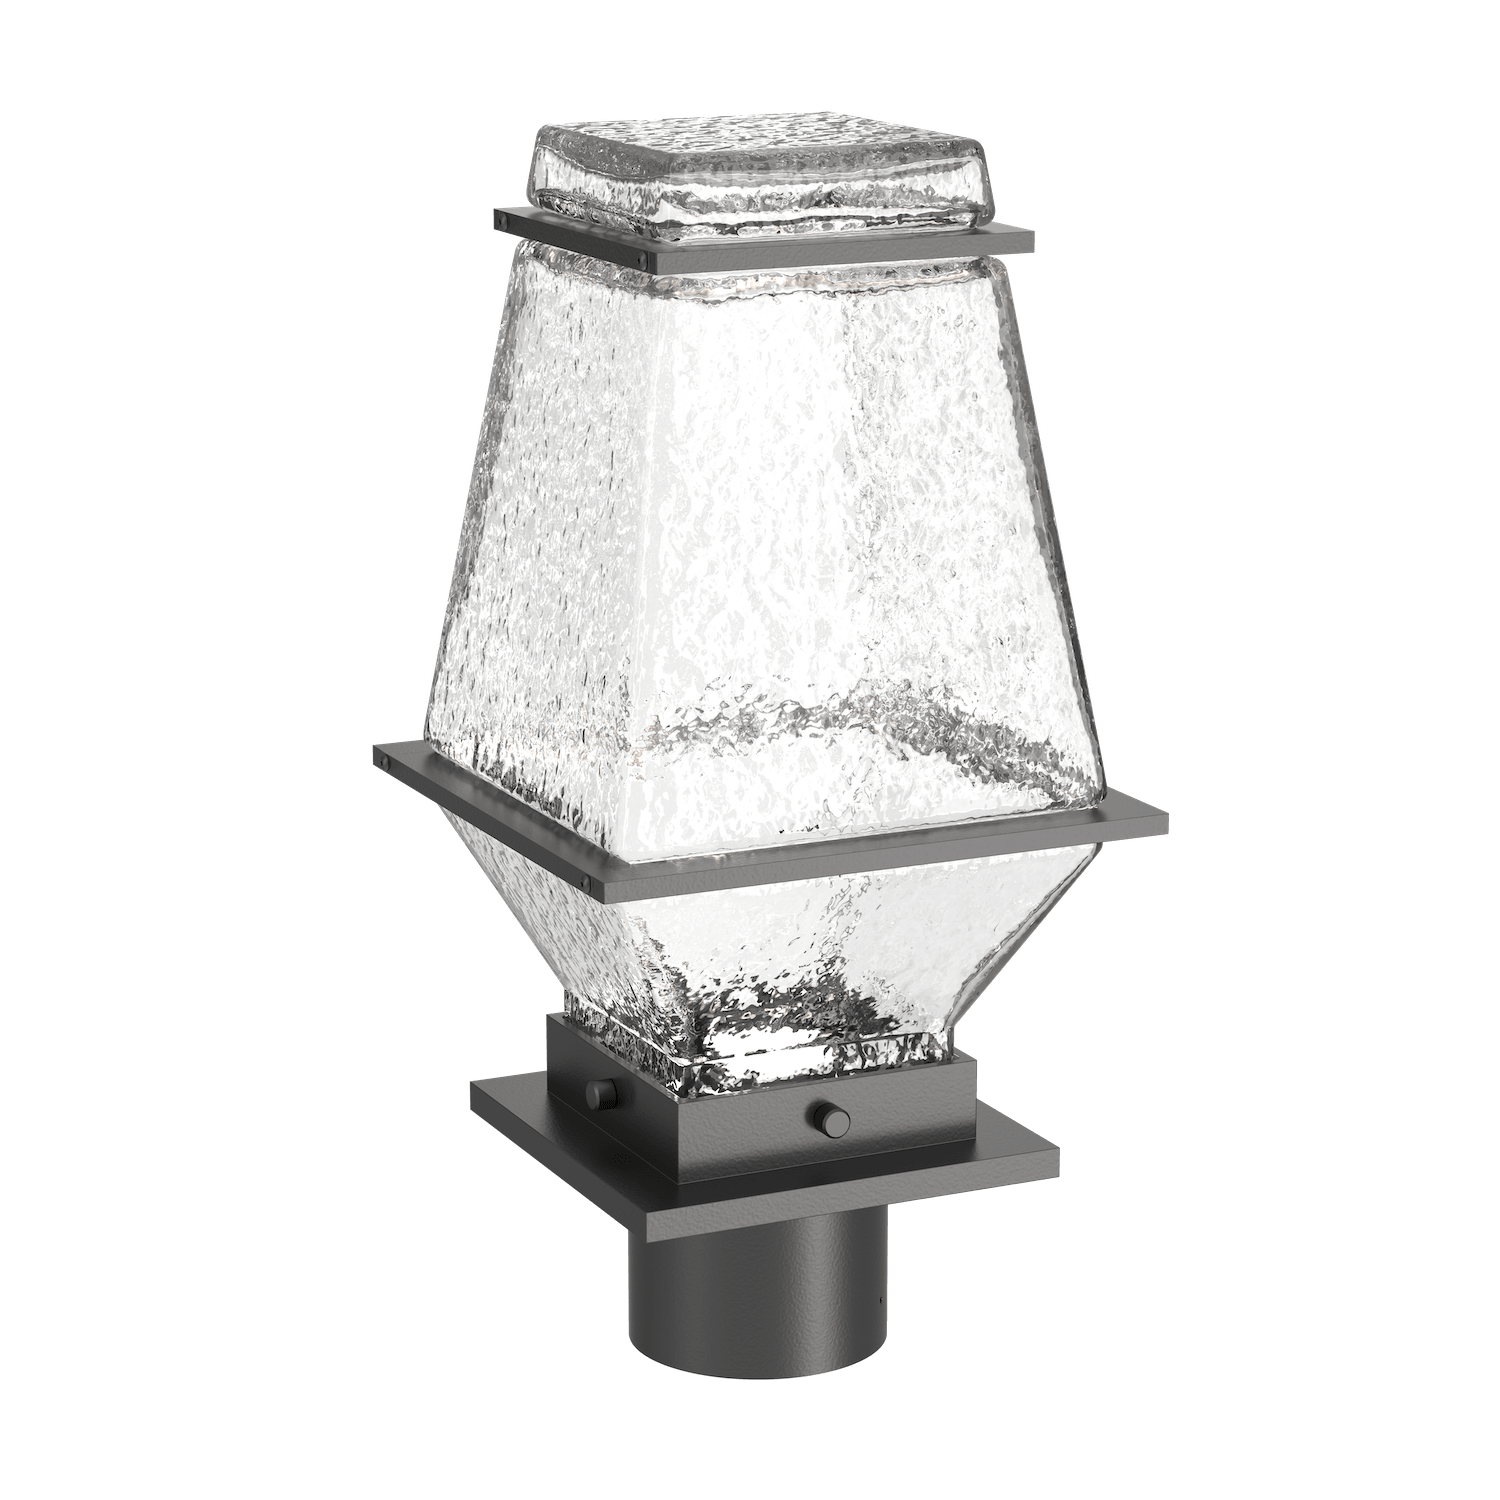 OMB0077-02-AG-C-Hammerton-Studio-Landmark-16-inch-postmount-light-with-argento-grey-finish-and-clear-blown-glass-shades-and-LED-lamping